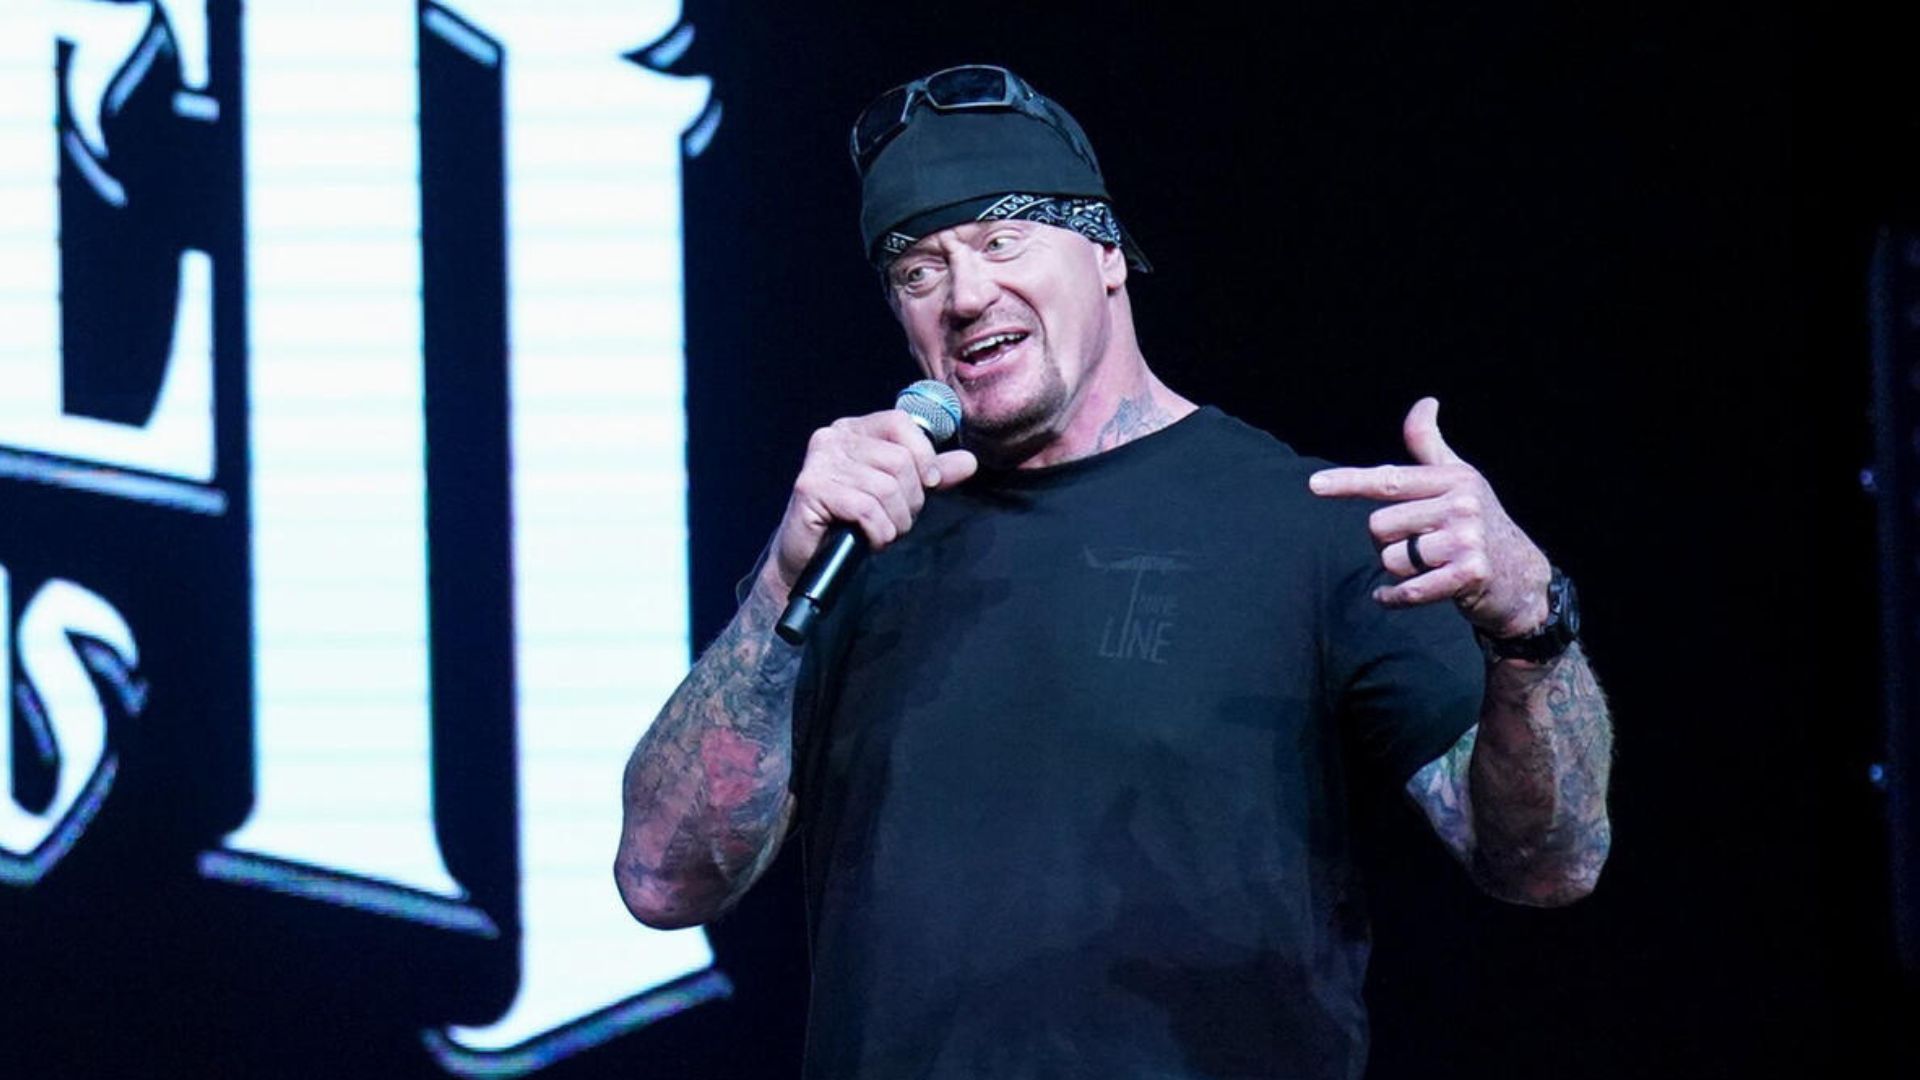 The Undertaker at the UNDERTAKER 1 deadMAN SHOW! [Image credits: WWE.com]